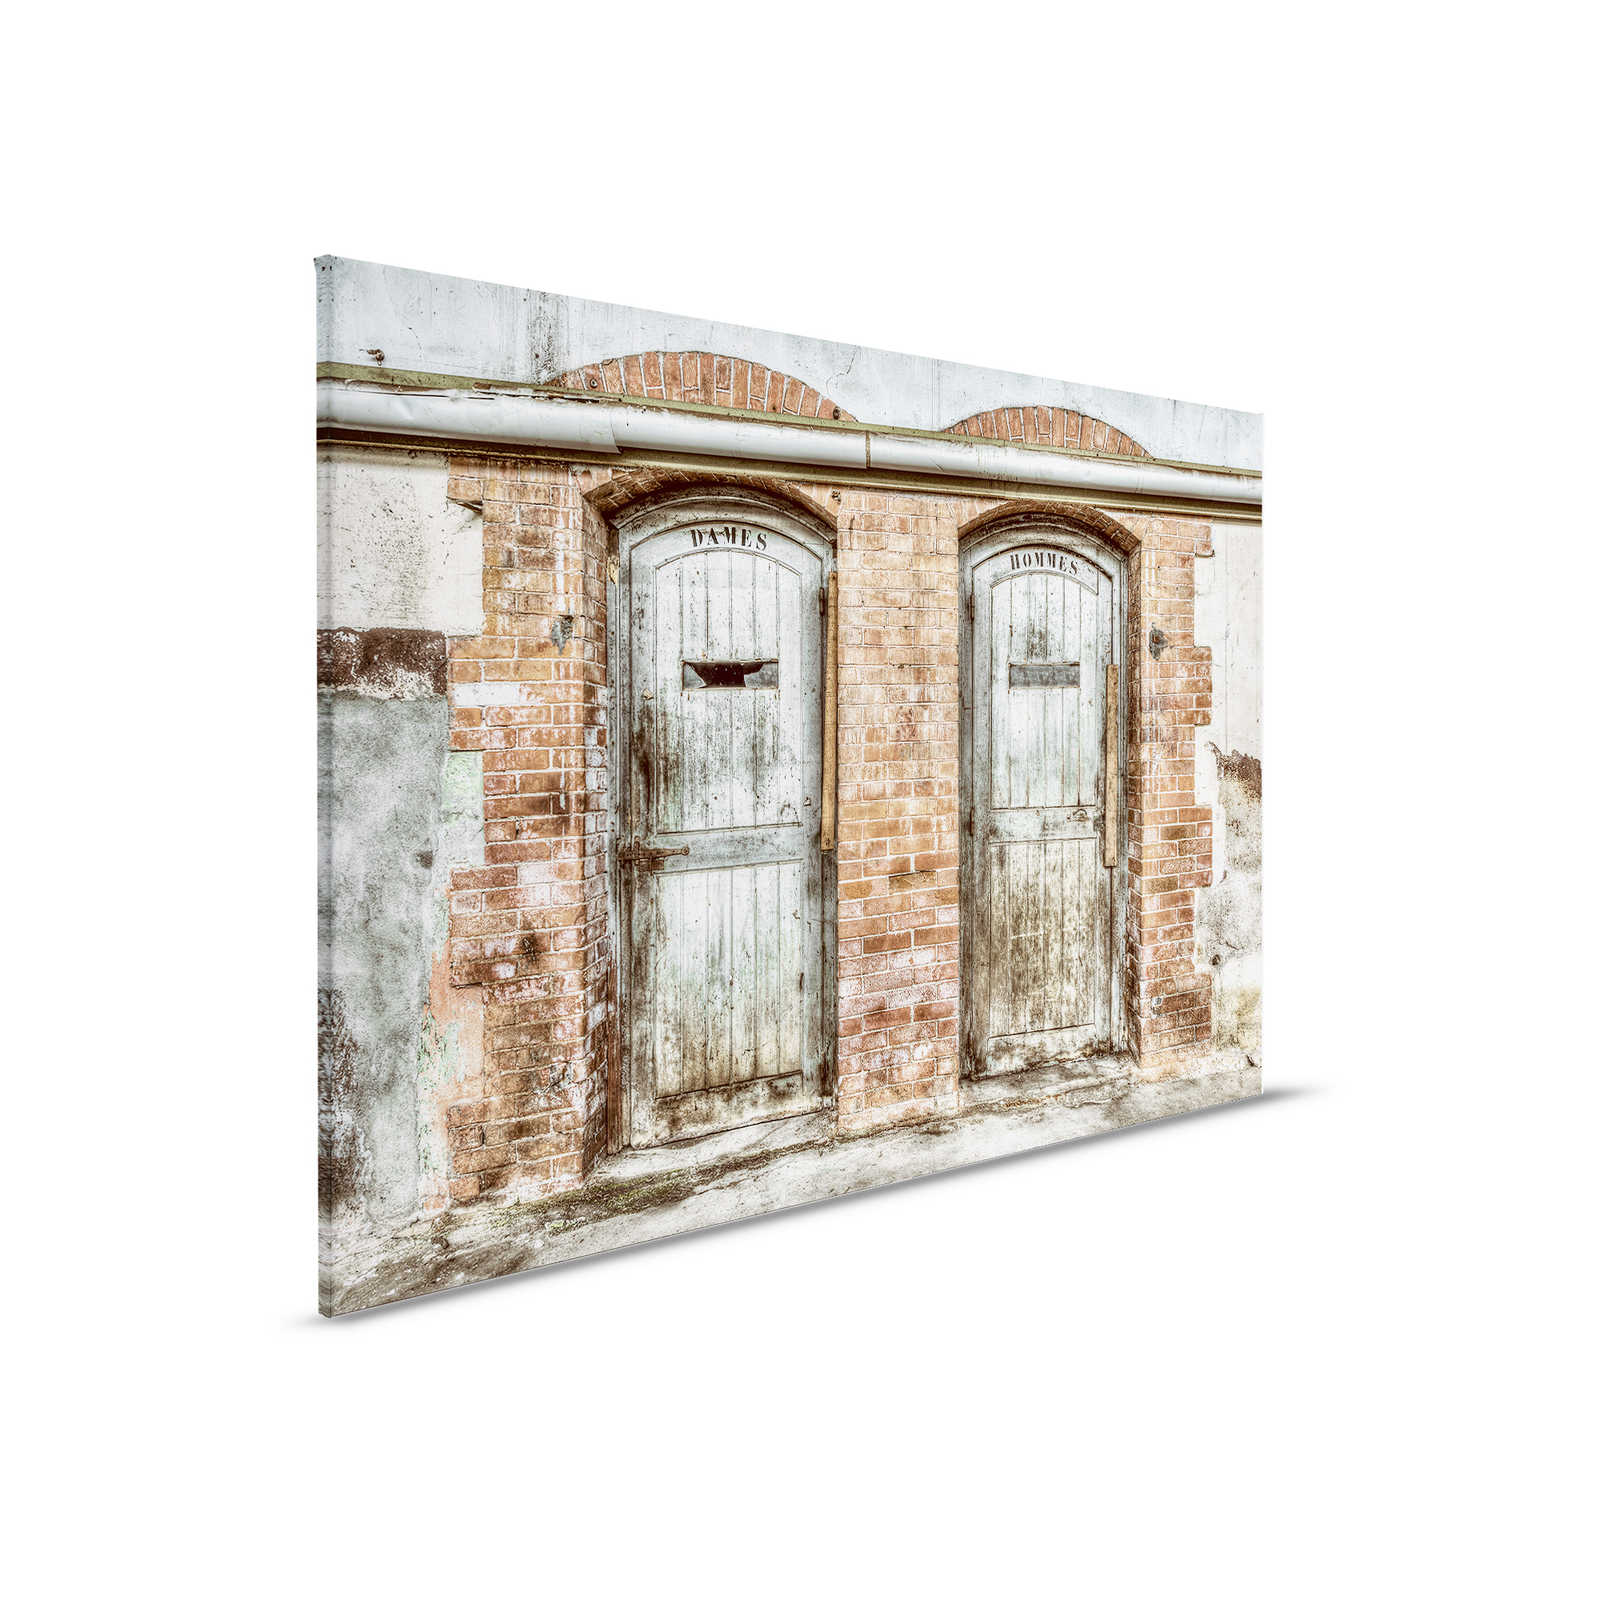         Canvas painting Stone Wall with Vintage Toilet Doors | beige, cream - 0.90 m x 0.60 m
    